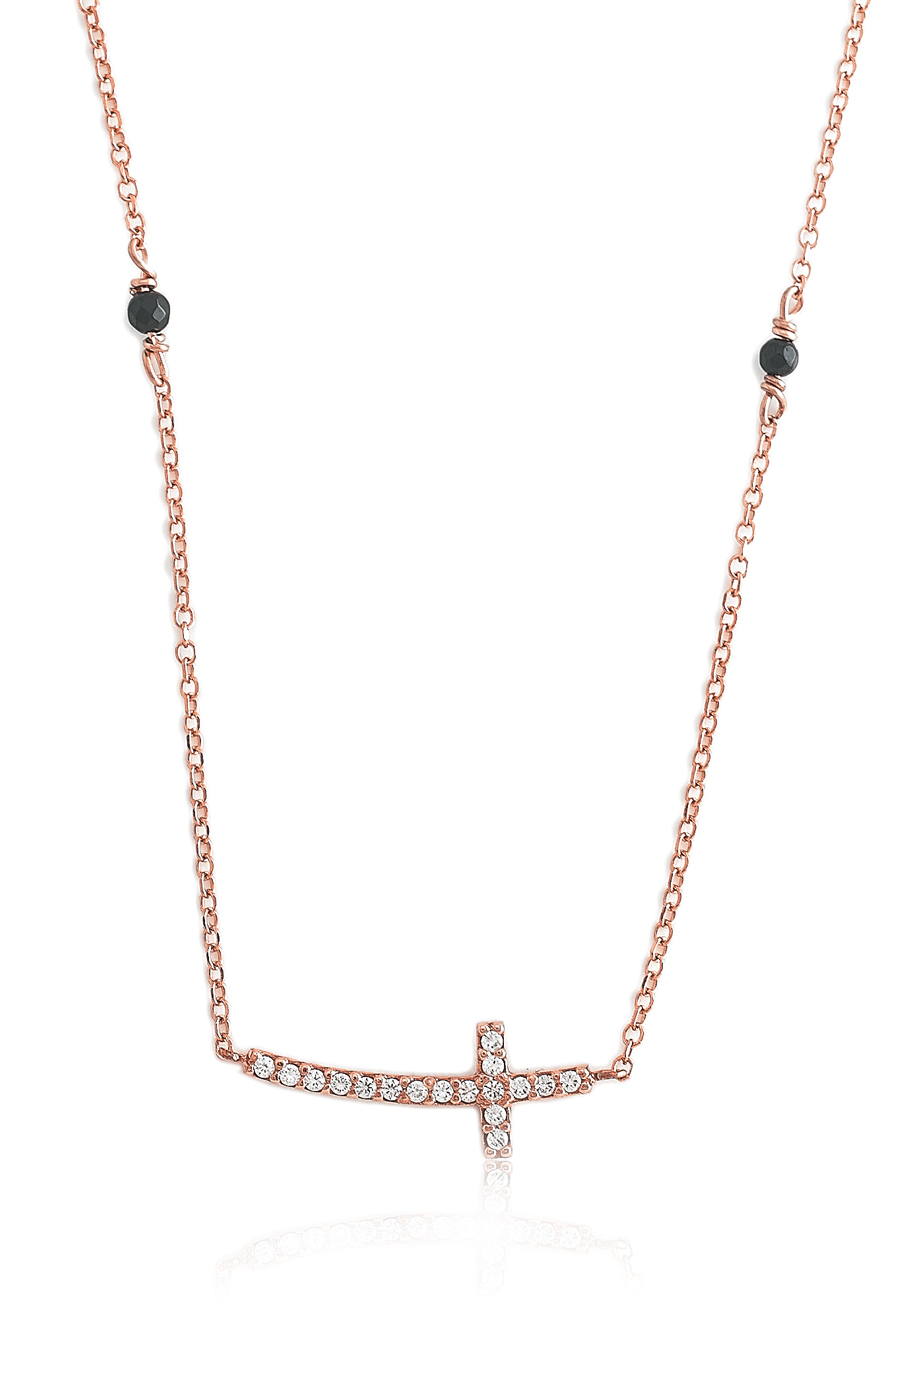 Sideways Cross Necklace, 14K Rose, Yellow, Or White Gold, Small, Thin &  Sleek, As Seen On Kelly Ripa - Yahoo Shopping